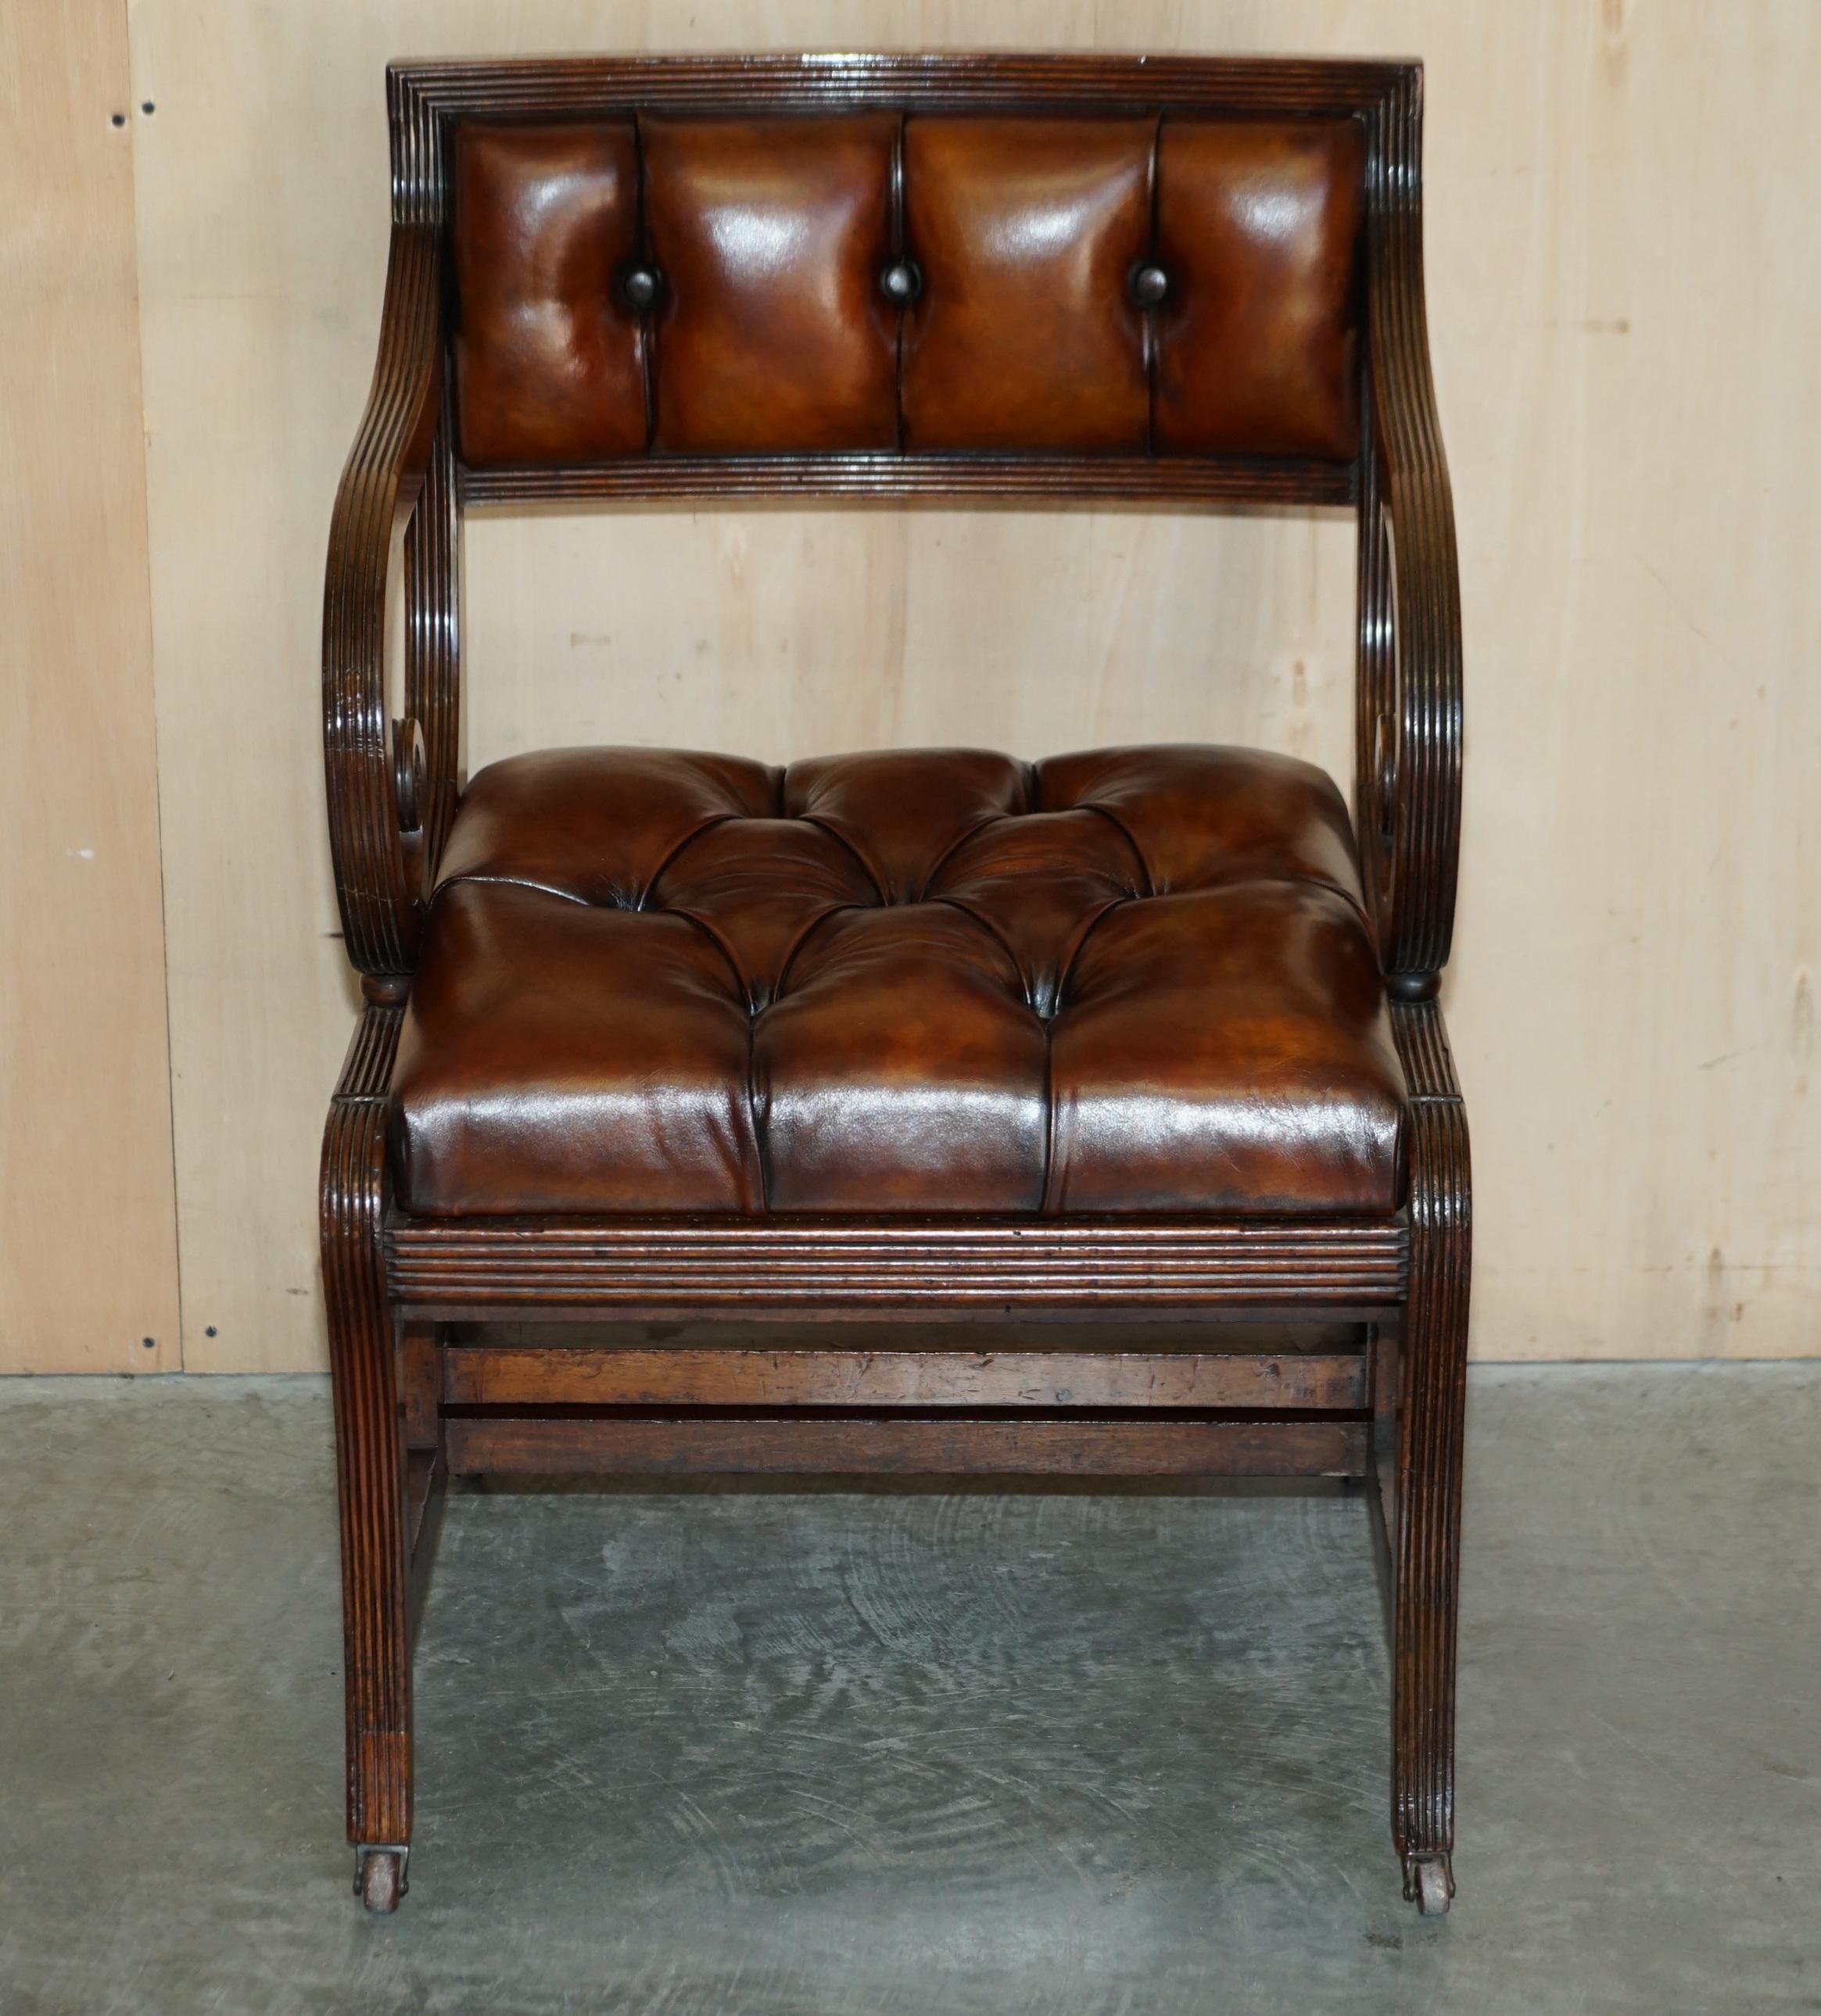 Regency Antique 1810 Attributed to Gillows Metamorphic Leather Library Armchair Steps For Sale